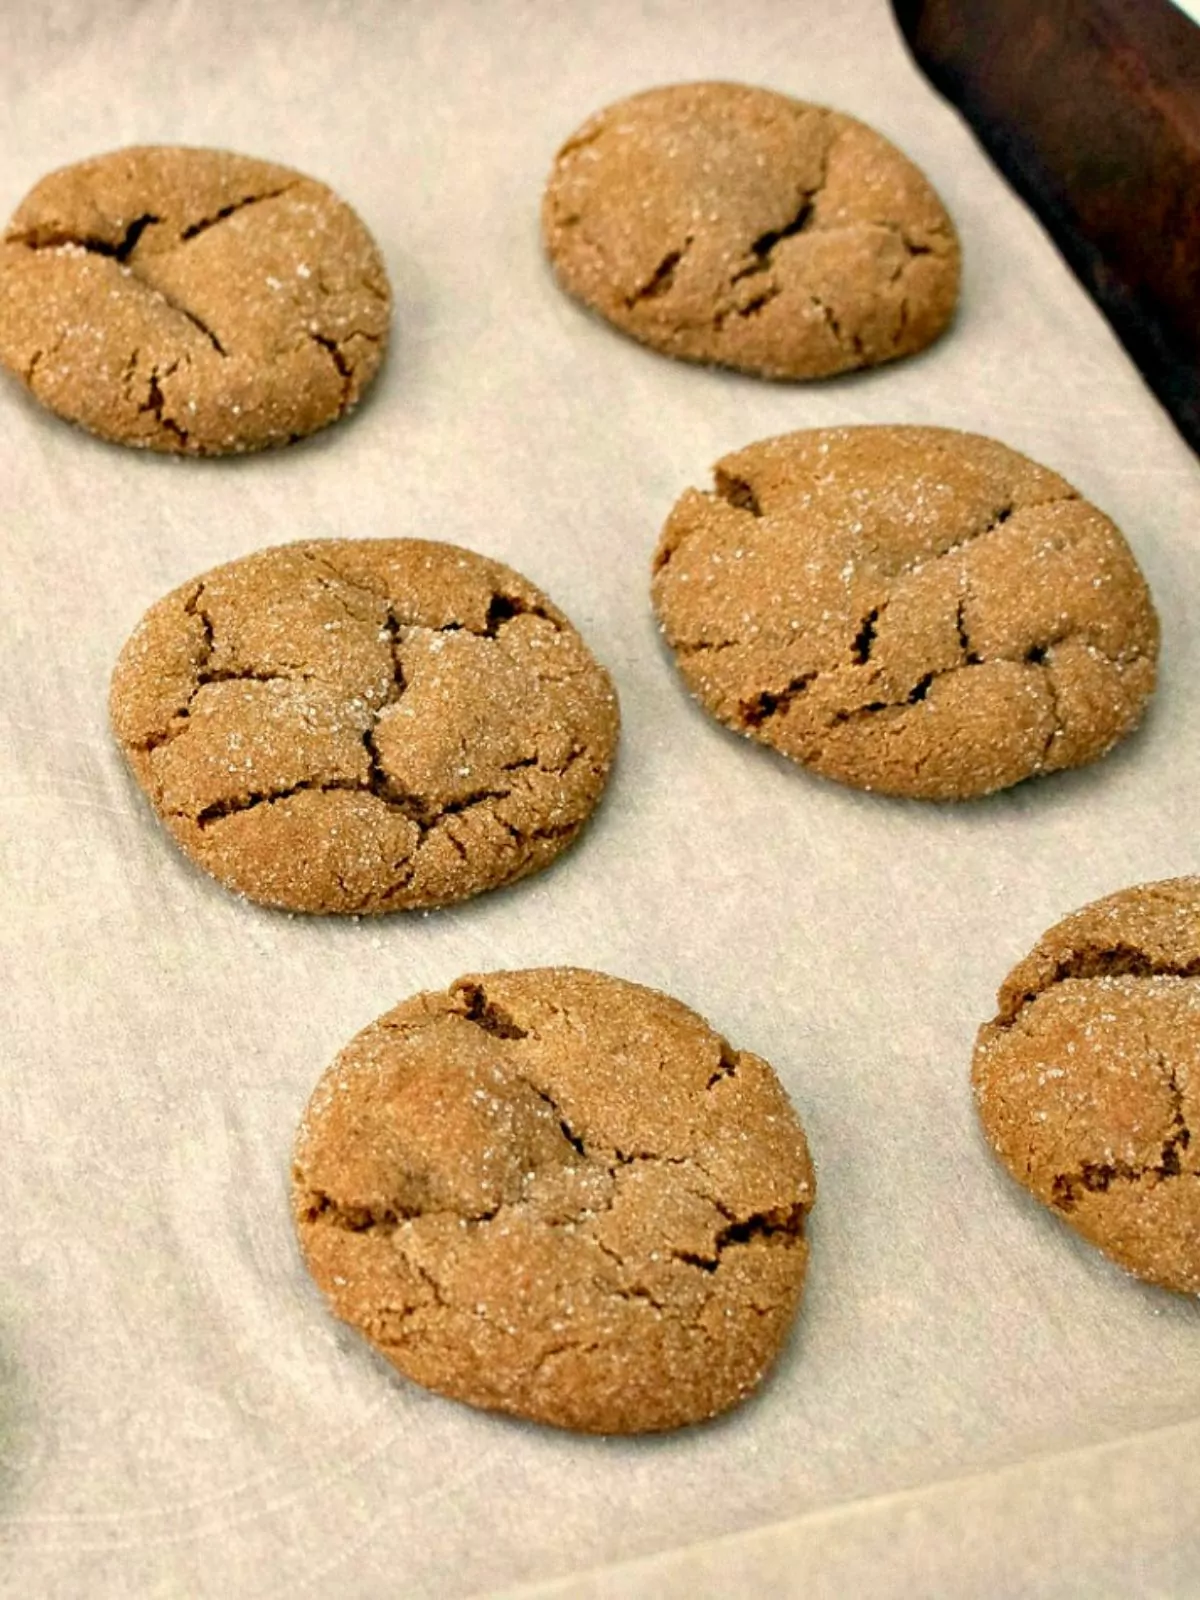 Baked gingersnap cookies on baking tray.